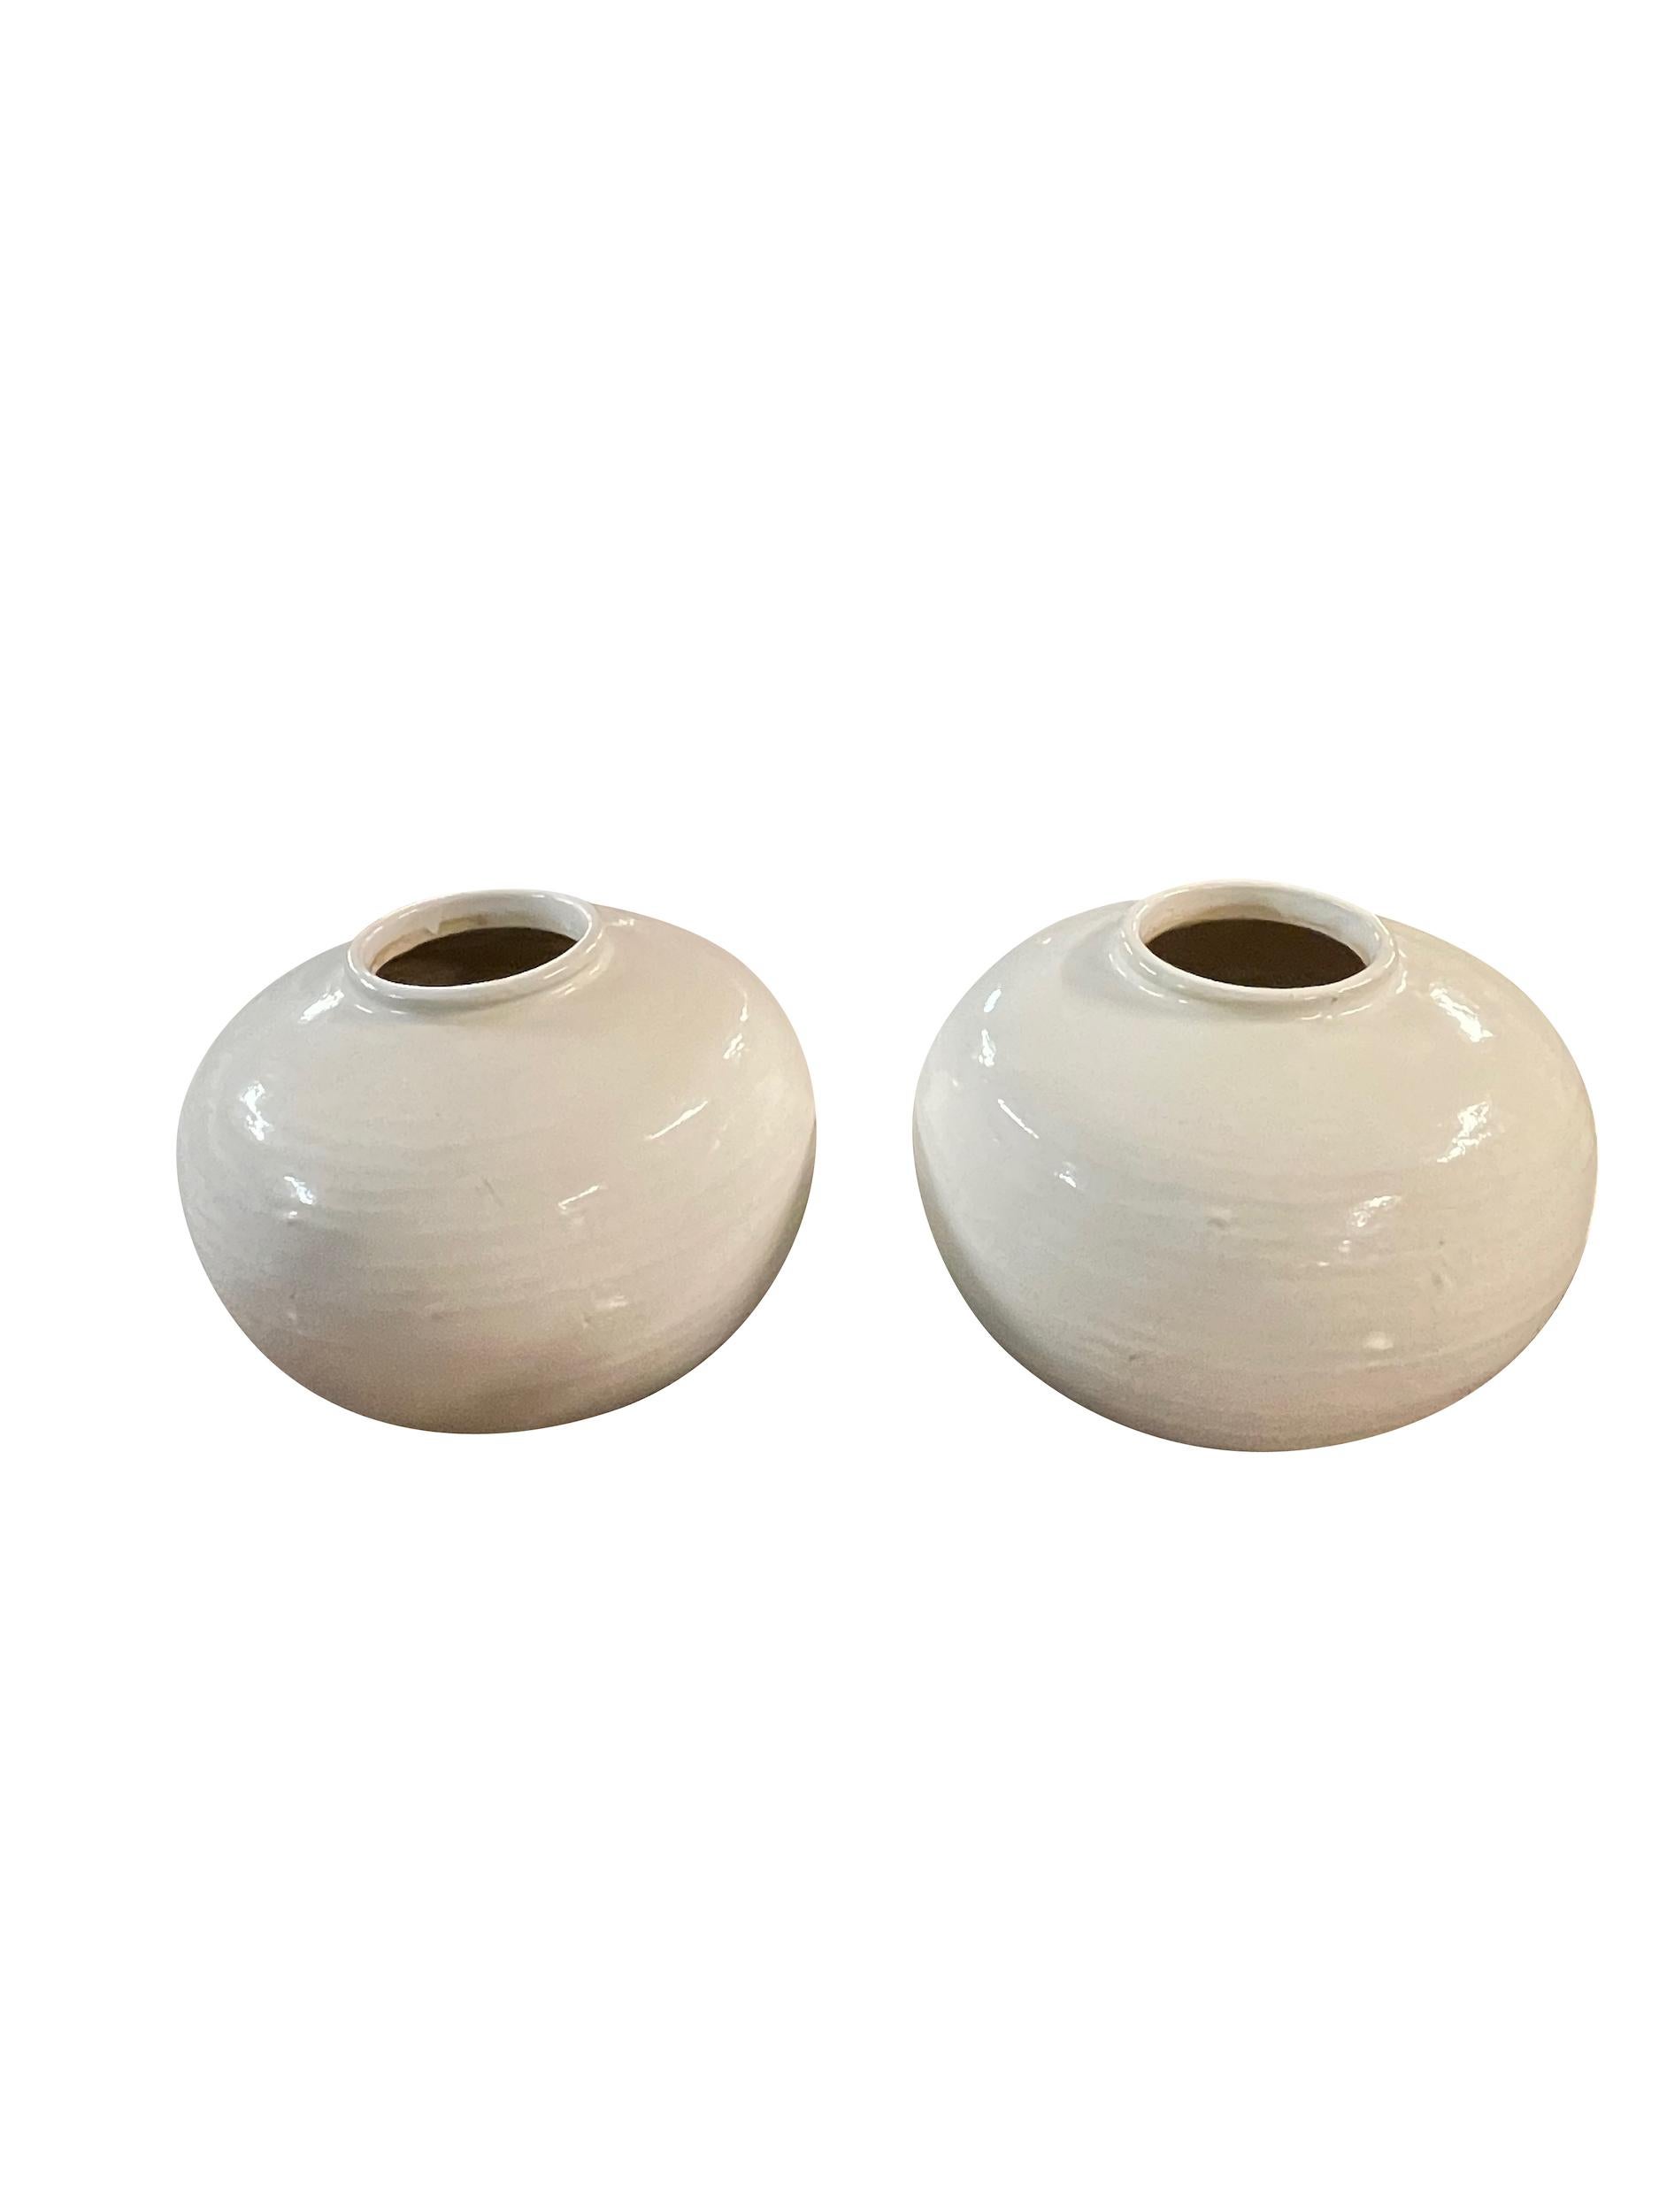 Contemporary Chinese large squat shaped cream vase.
Two available and sold individually.
From a large collection of cream colored vases.